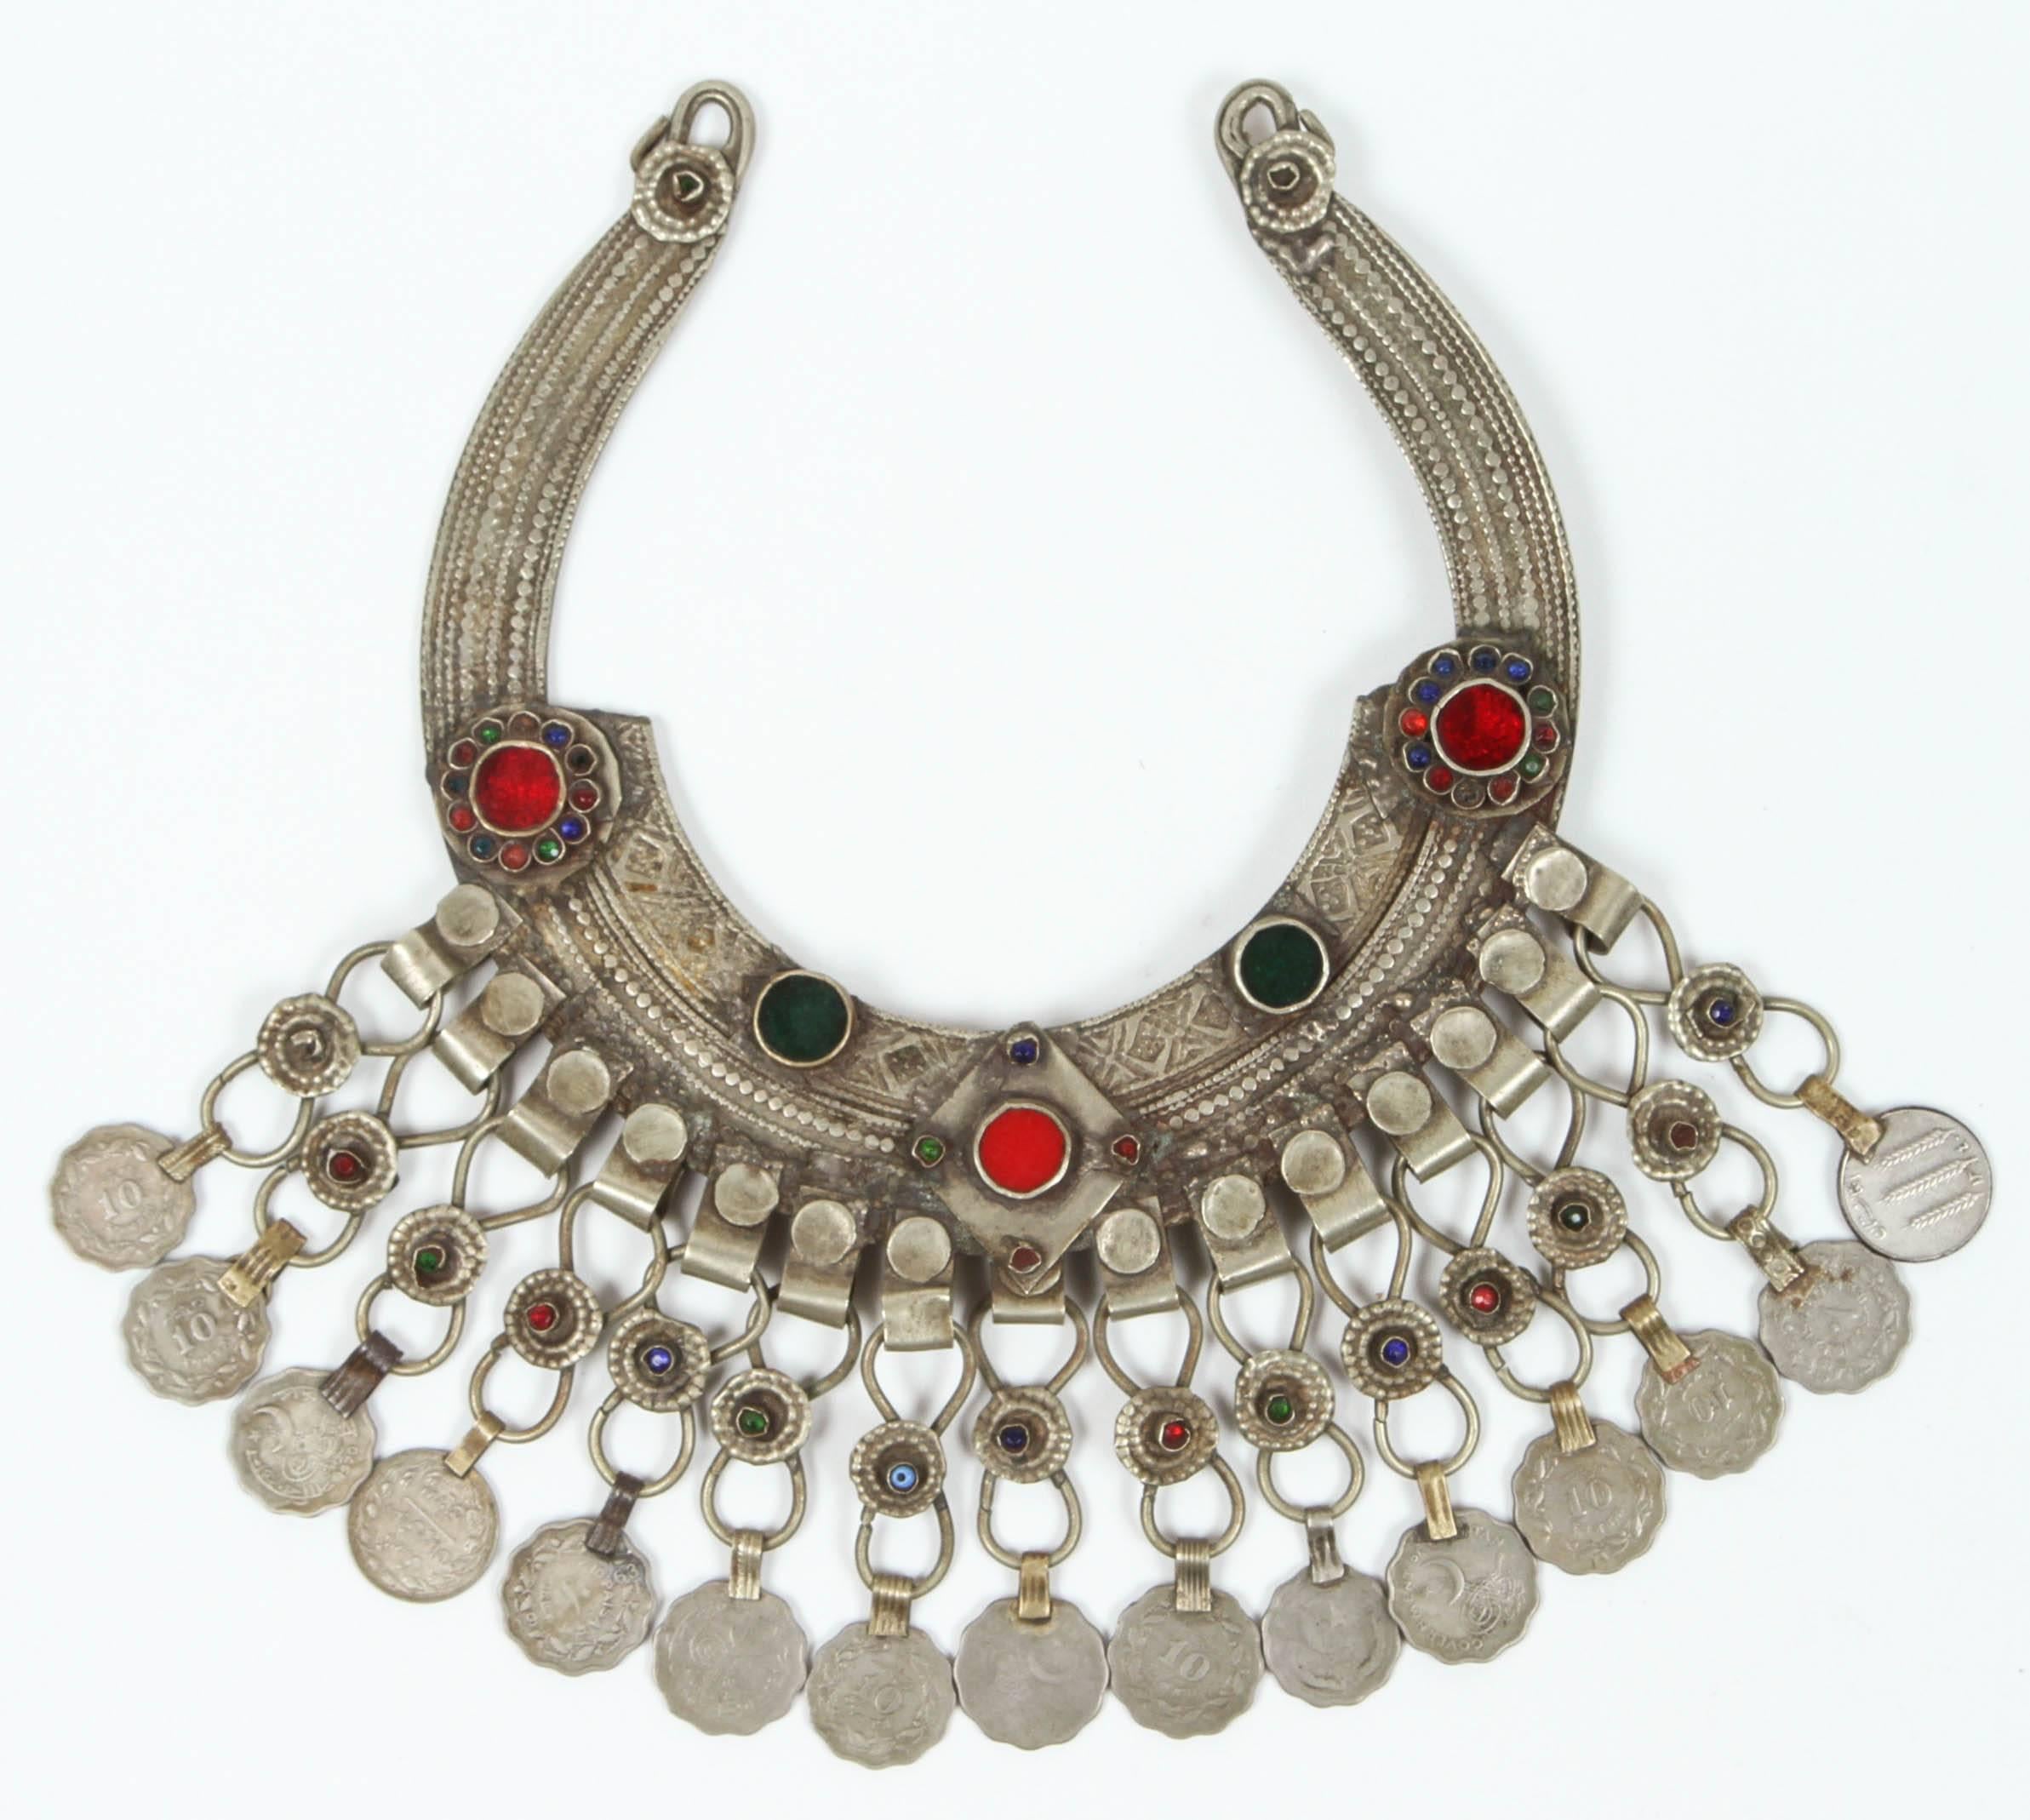 A Moroccan Tribal jewelry vintage set of a bracelet and a chocker inlaid with colorful glass beads in red and green and dangling coins. Silver, but not of the standard of sterling and richly embellished with applied silver designs and filigree.